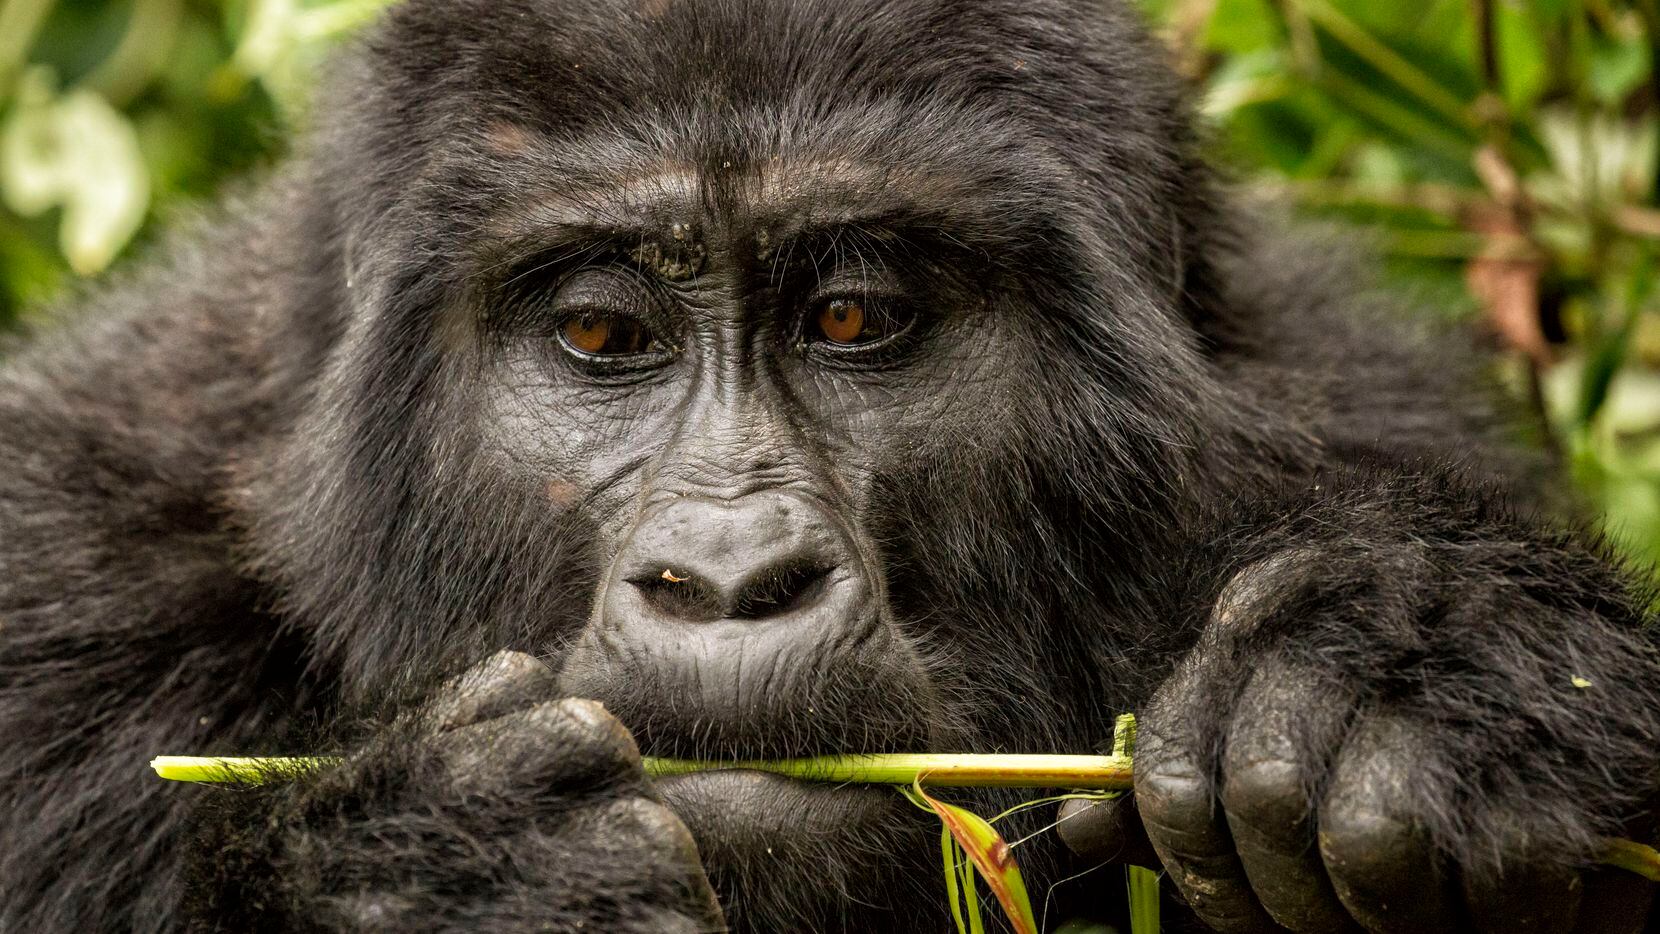 Mountain gorillas spend much of their time resting and eating.